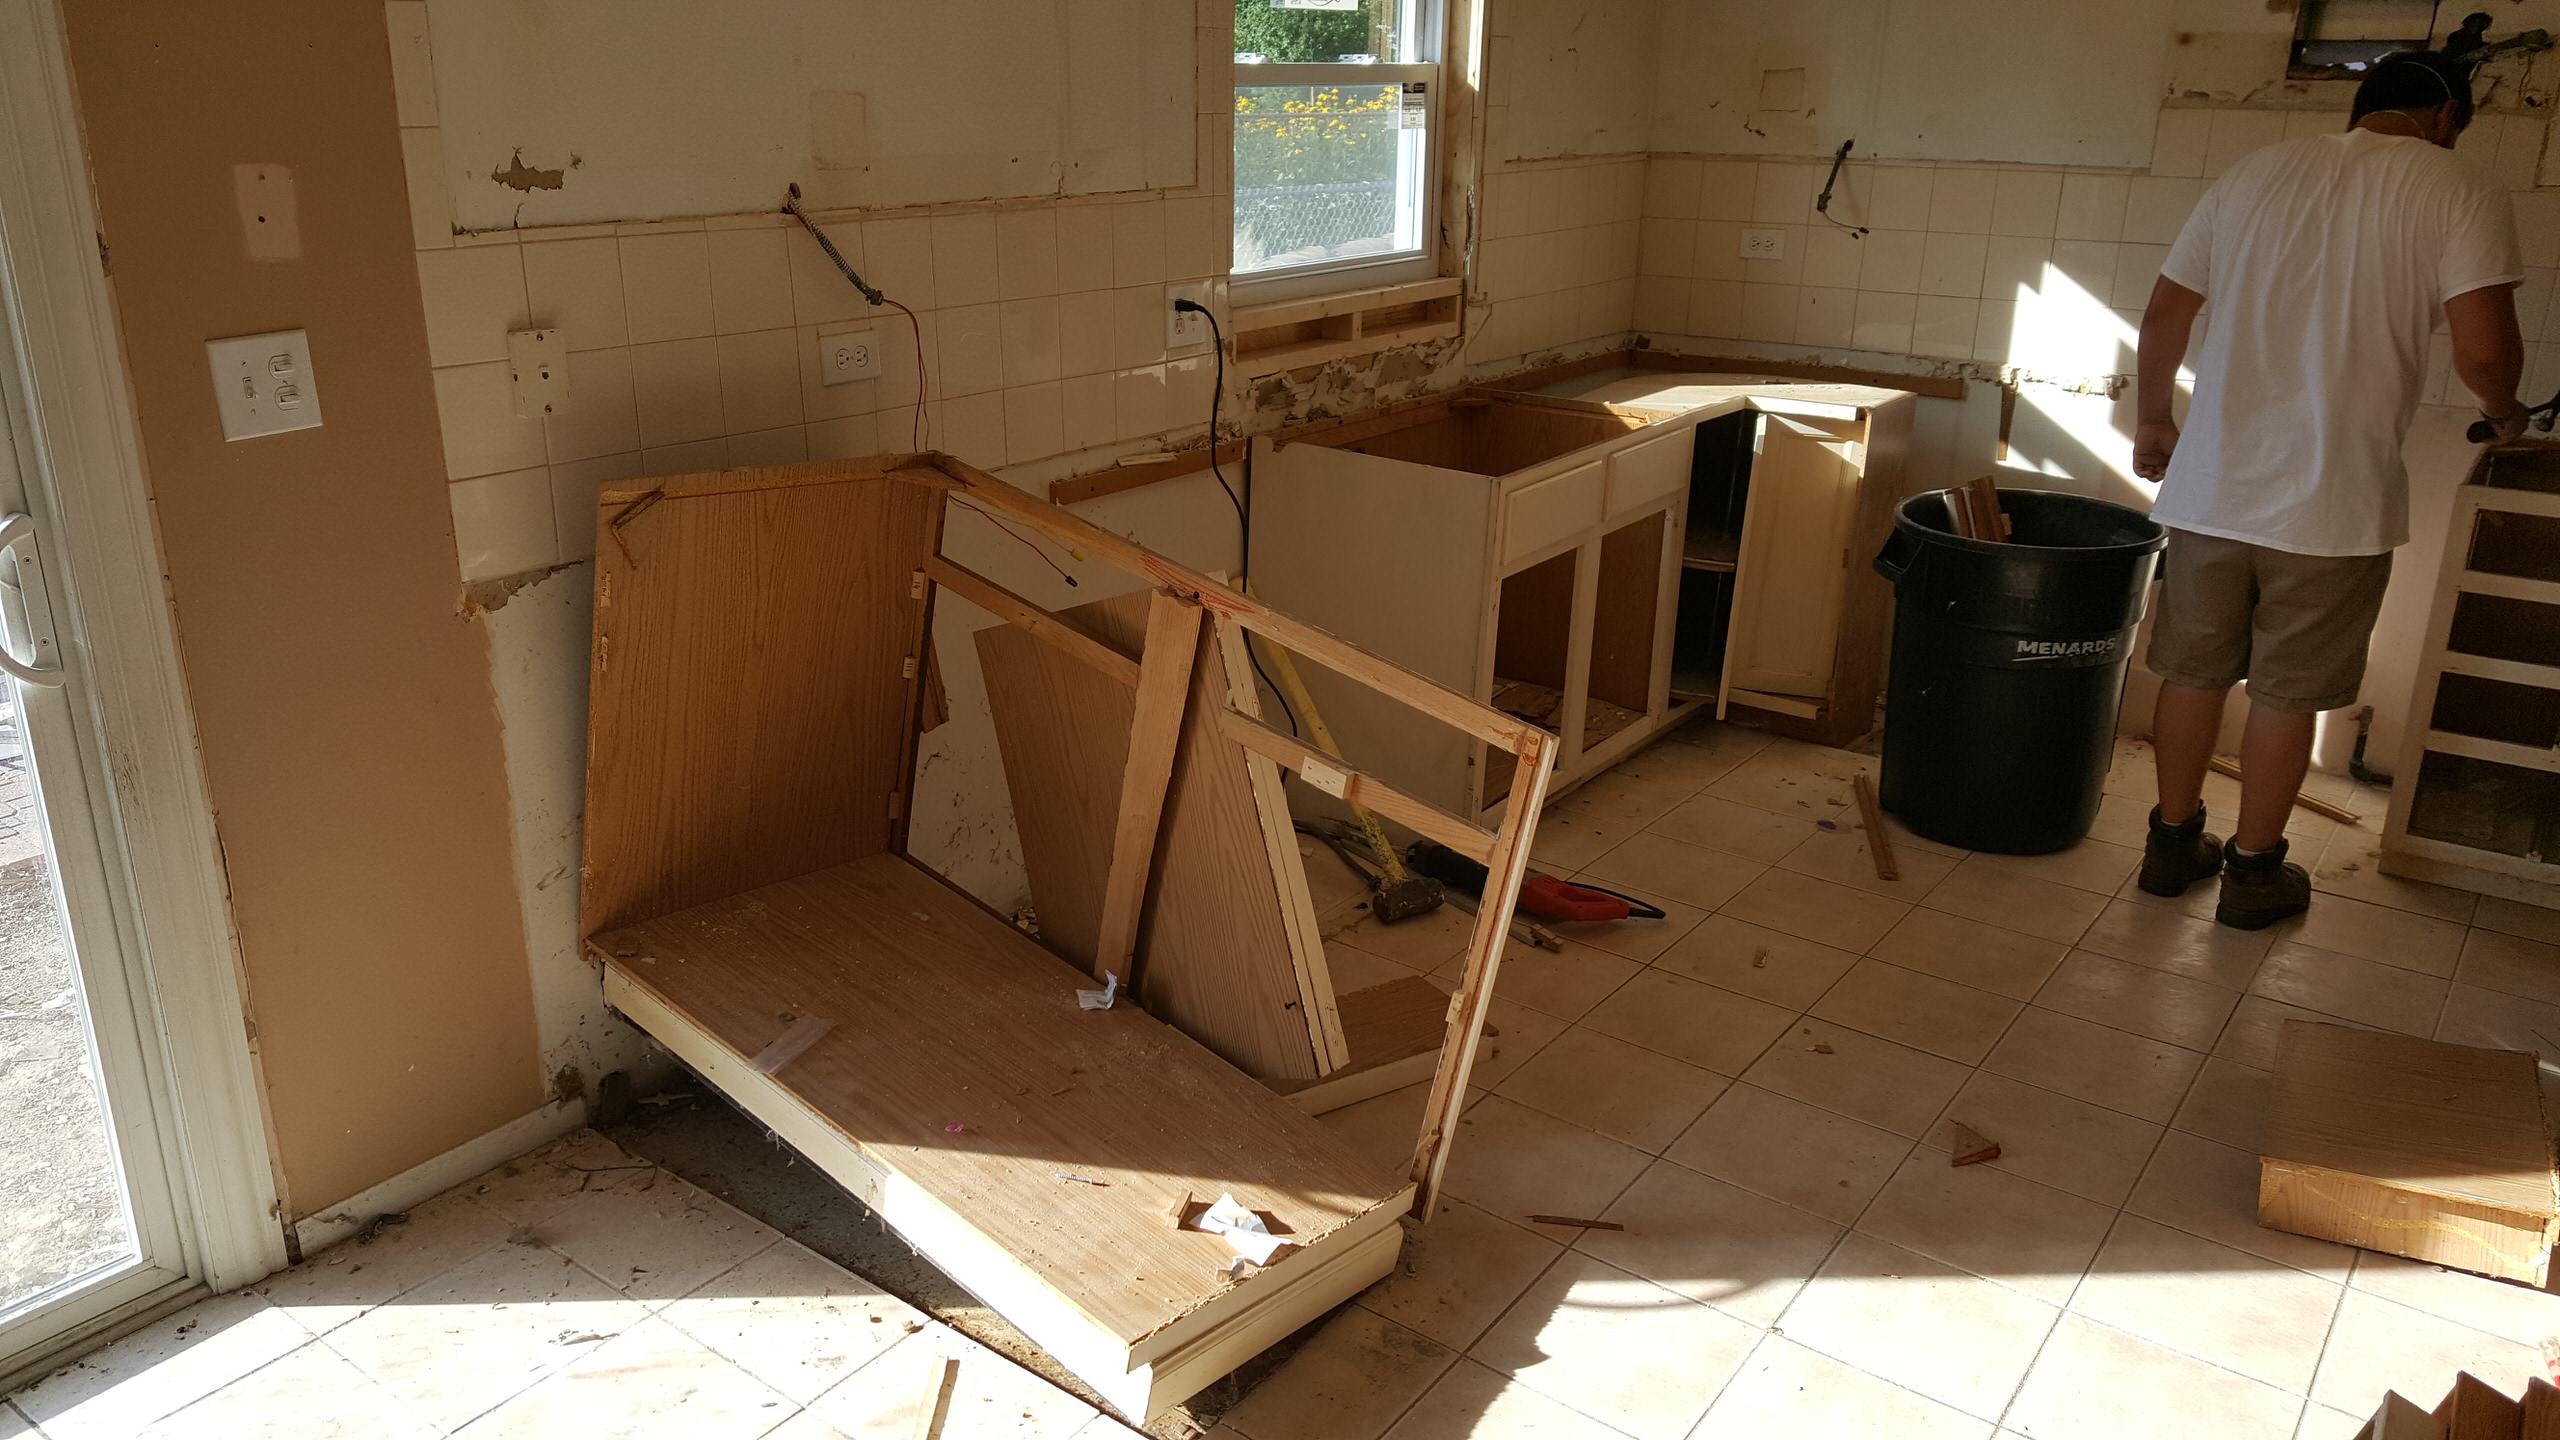 Existing kitchen during demo